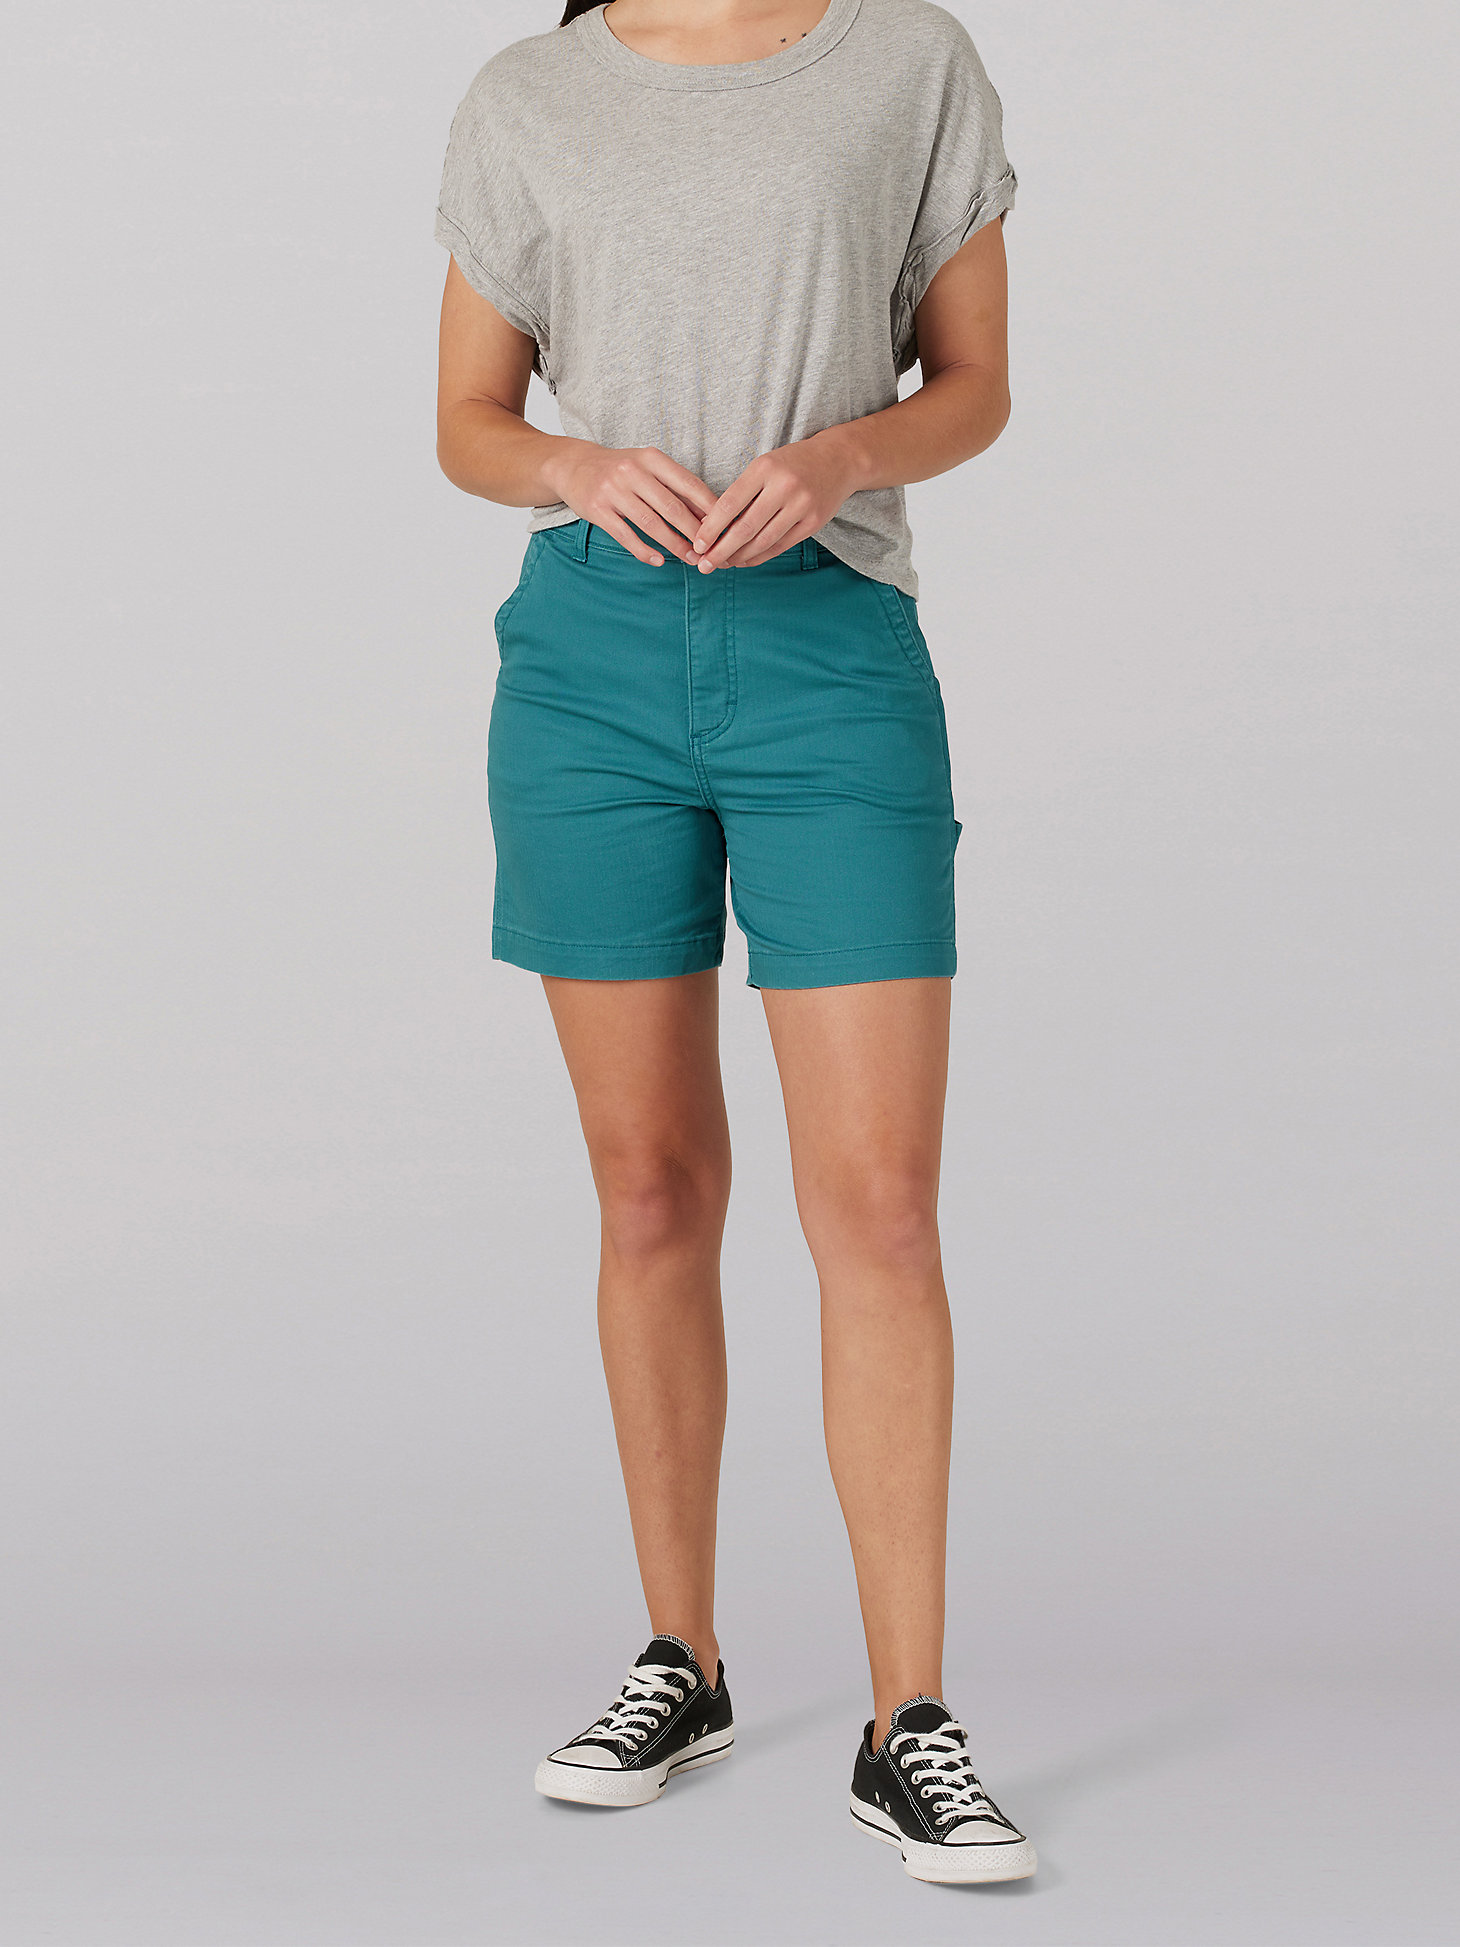 Women's Ultra Lux High Rise Carpenter Short in Midway Teal alternative view 6